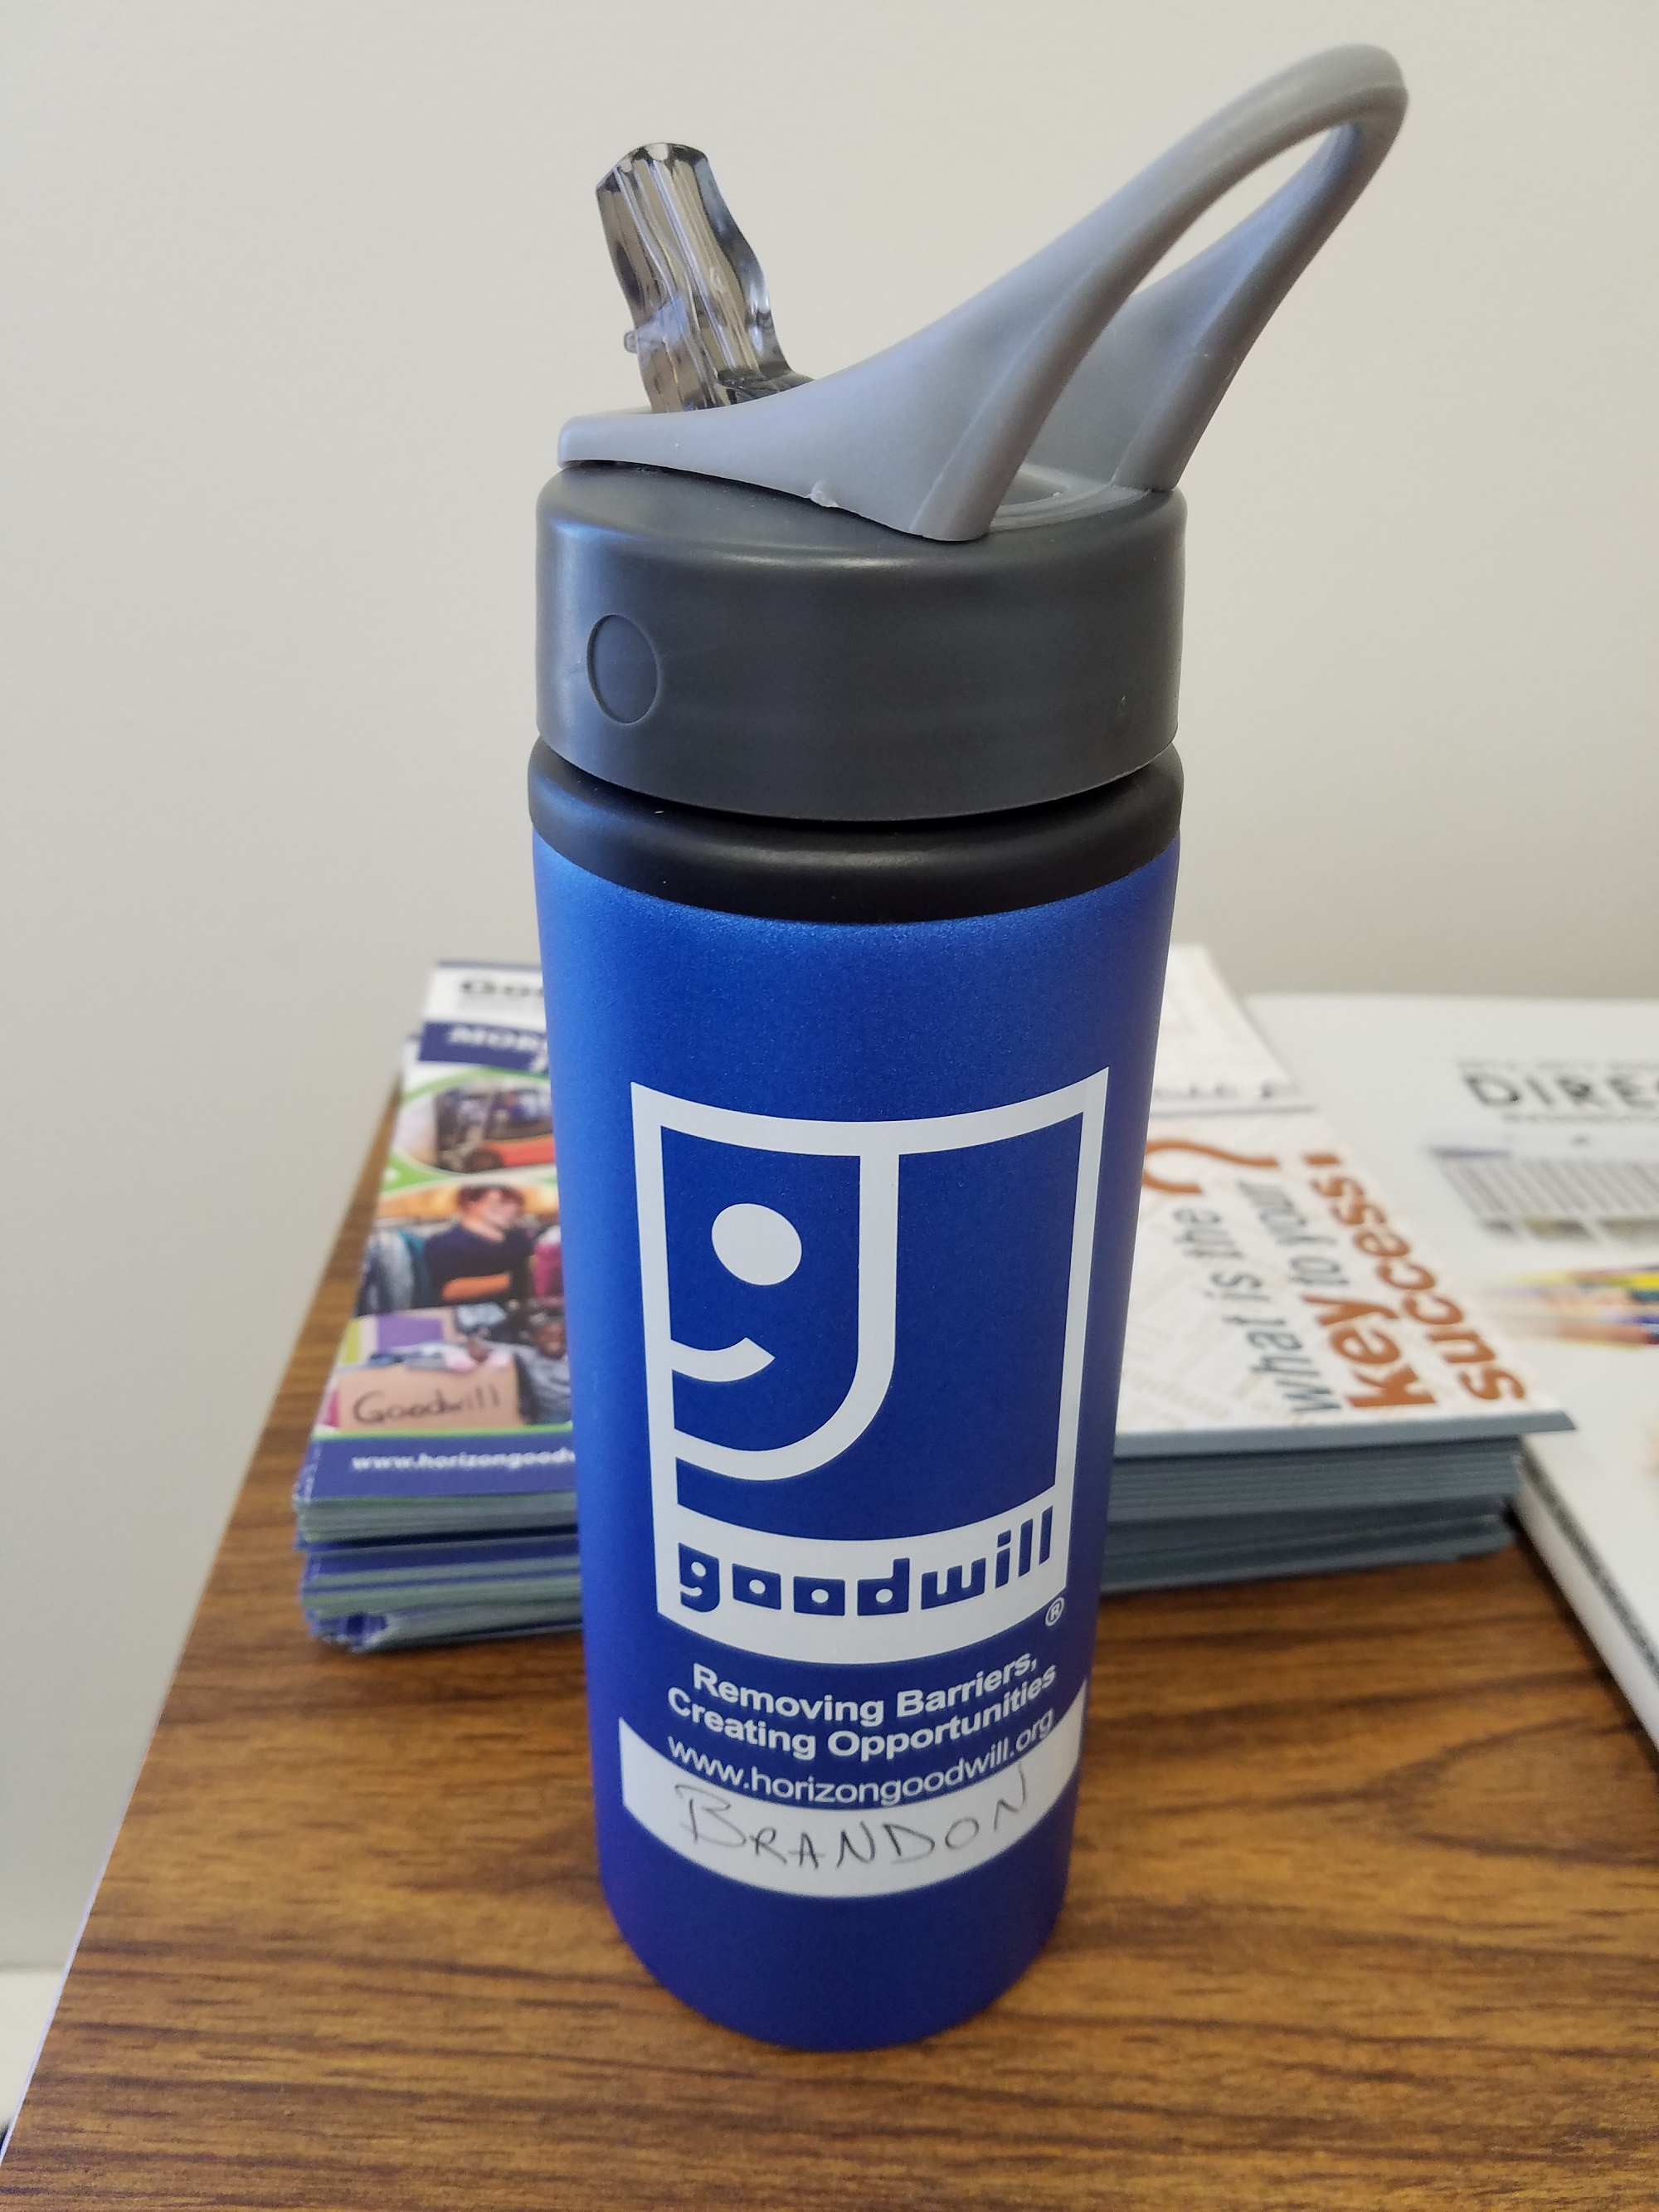 water bottle - Water, Water, Everywhere! - Horizon Goodwill goes Green!